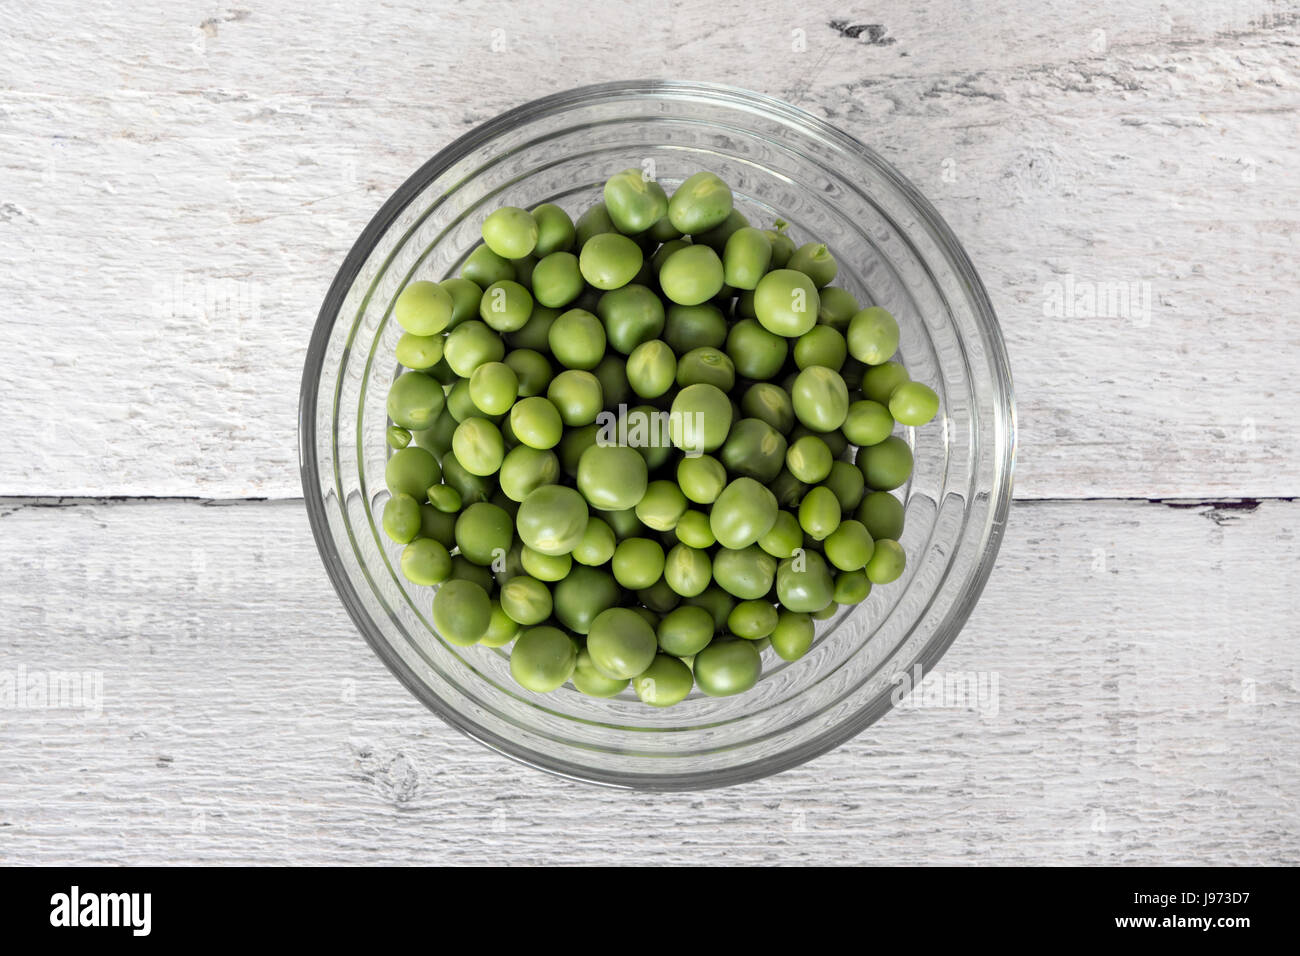 Green peas, freshly picked, in a glass bowl, on white wooden table. Top view Stock Photo